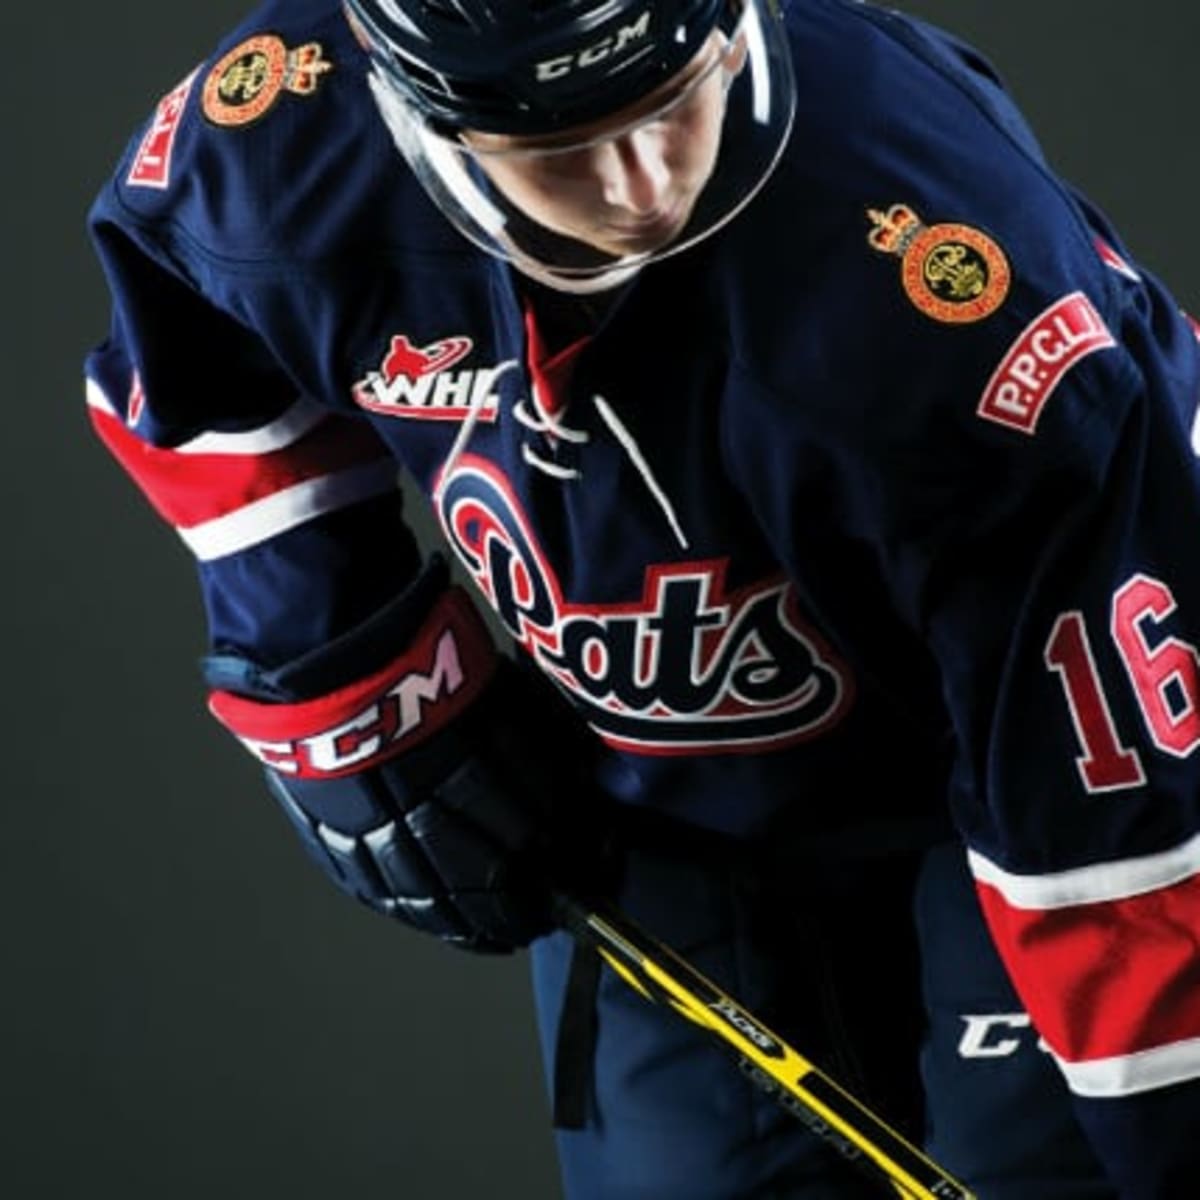 The WHL's Regina Pats have beautiful new jerseys for the 2015-16